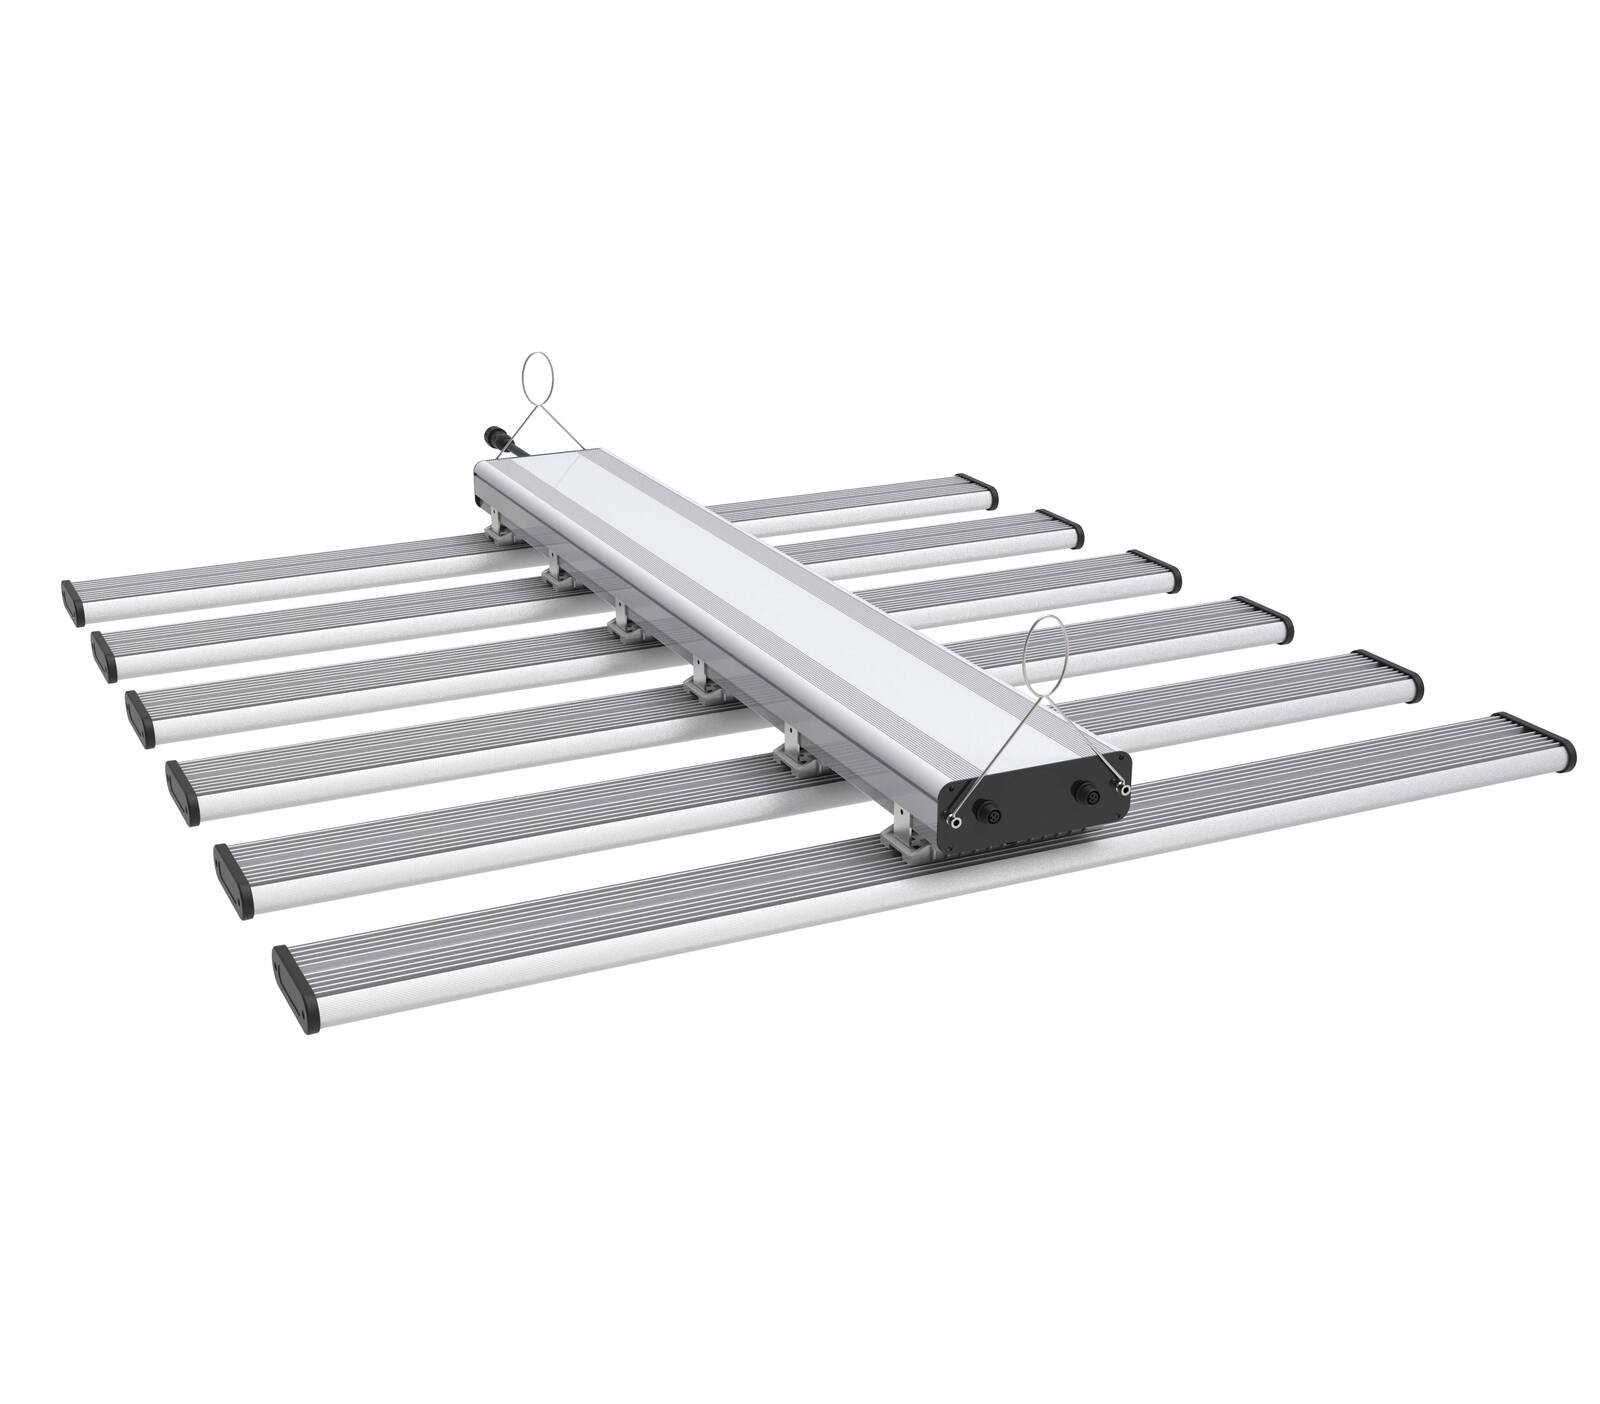 HydroLED 720w Professional LED bar - Latest 2020 spectrum - high output and efficacy - massive results